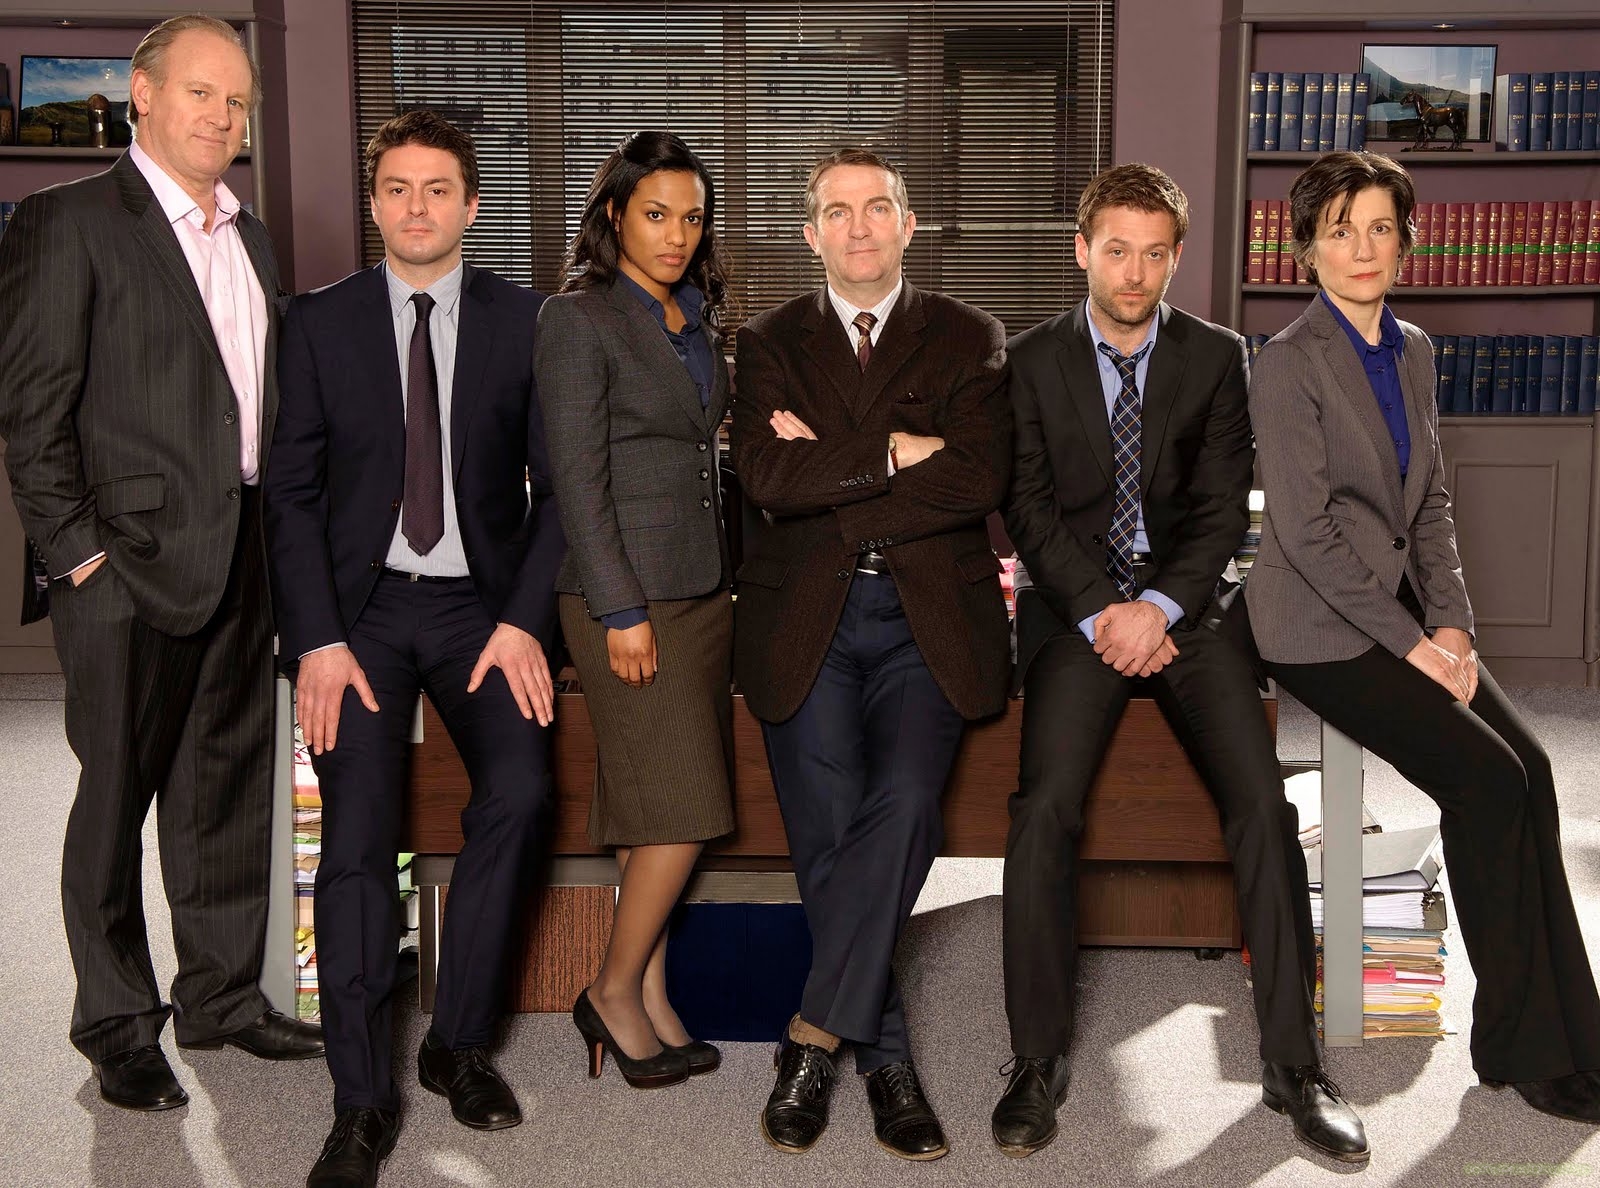 Law & Order: Uk Wallpapers